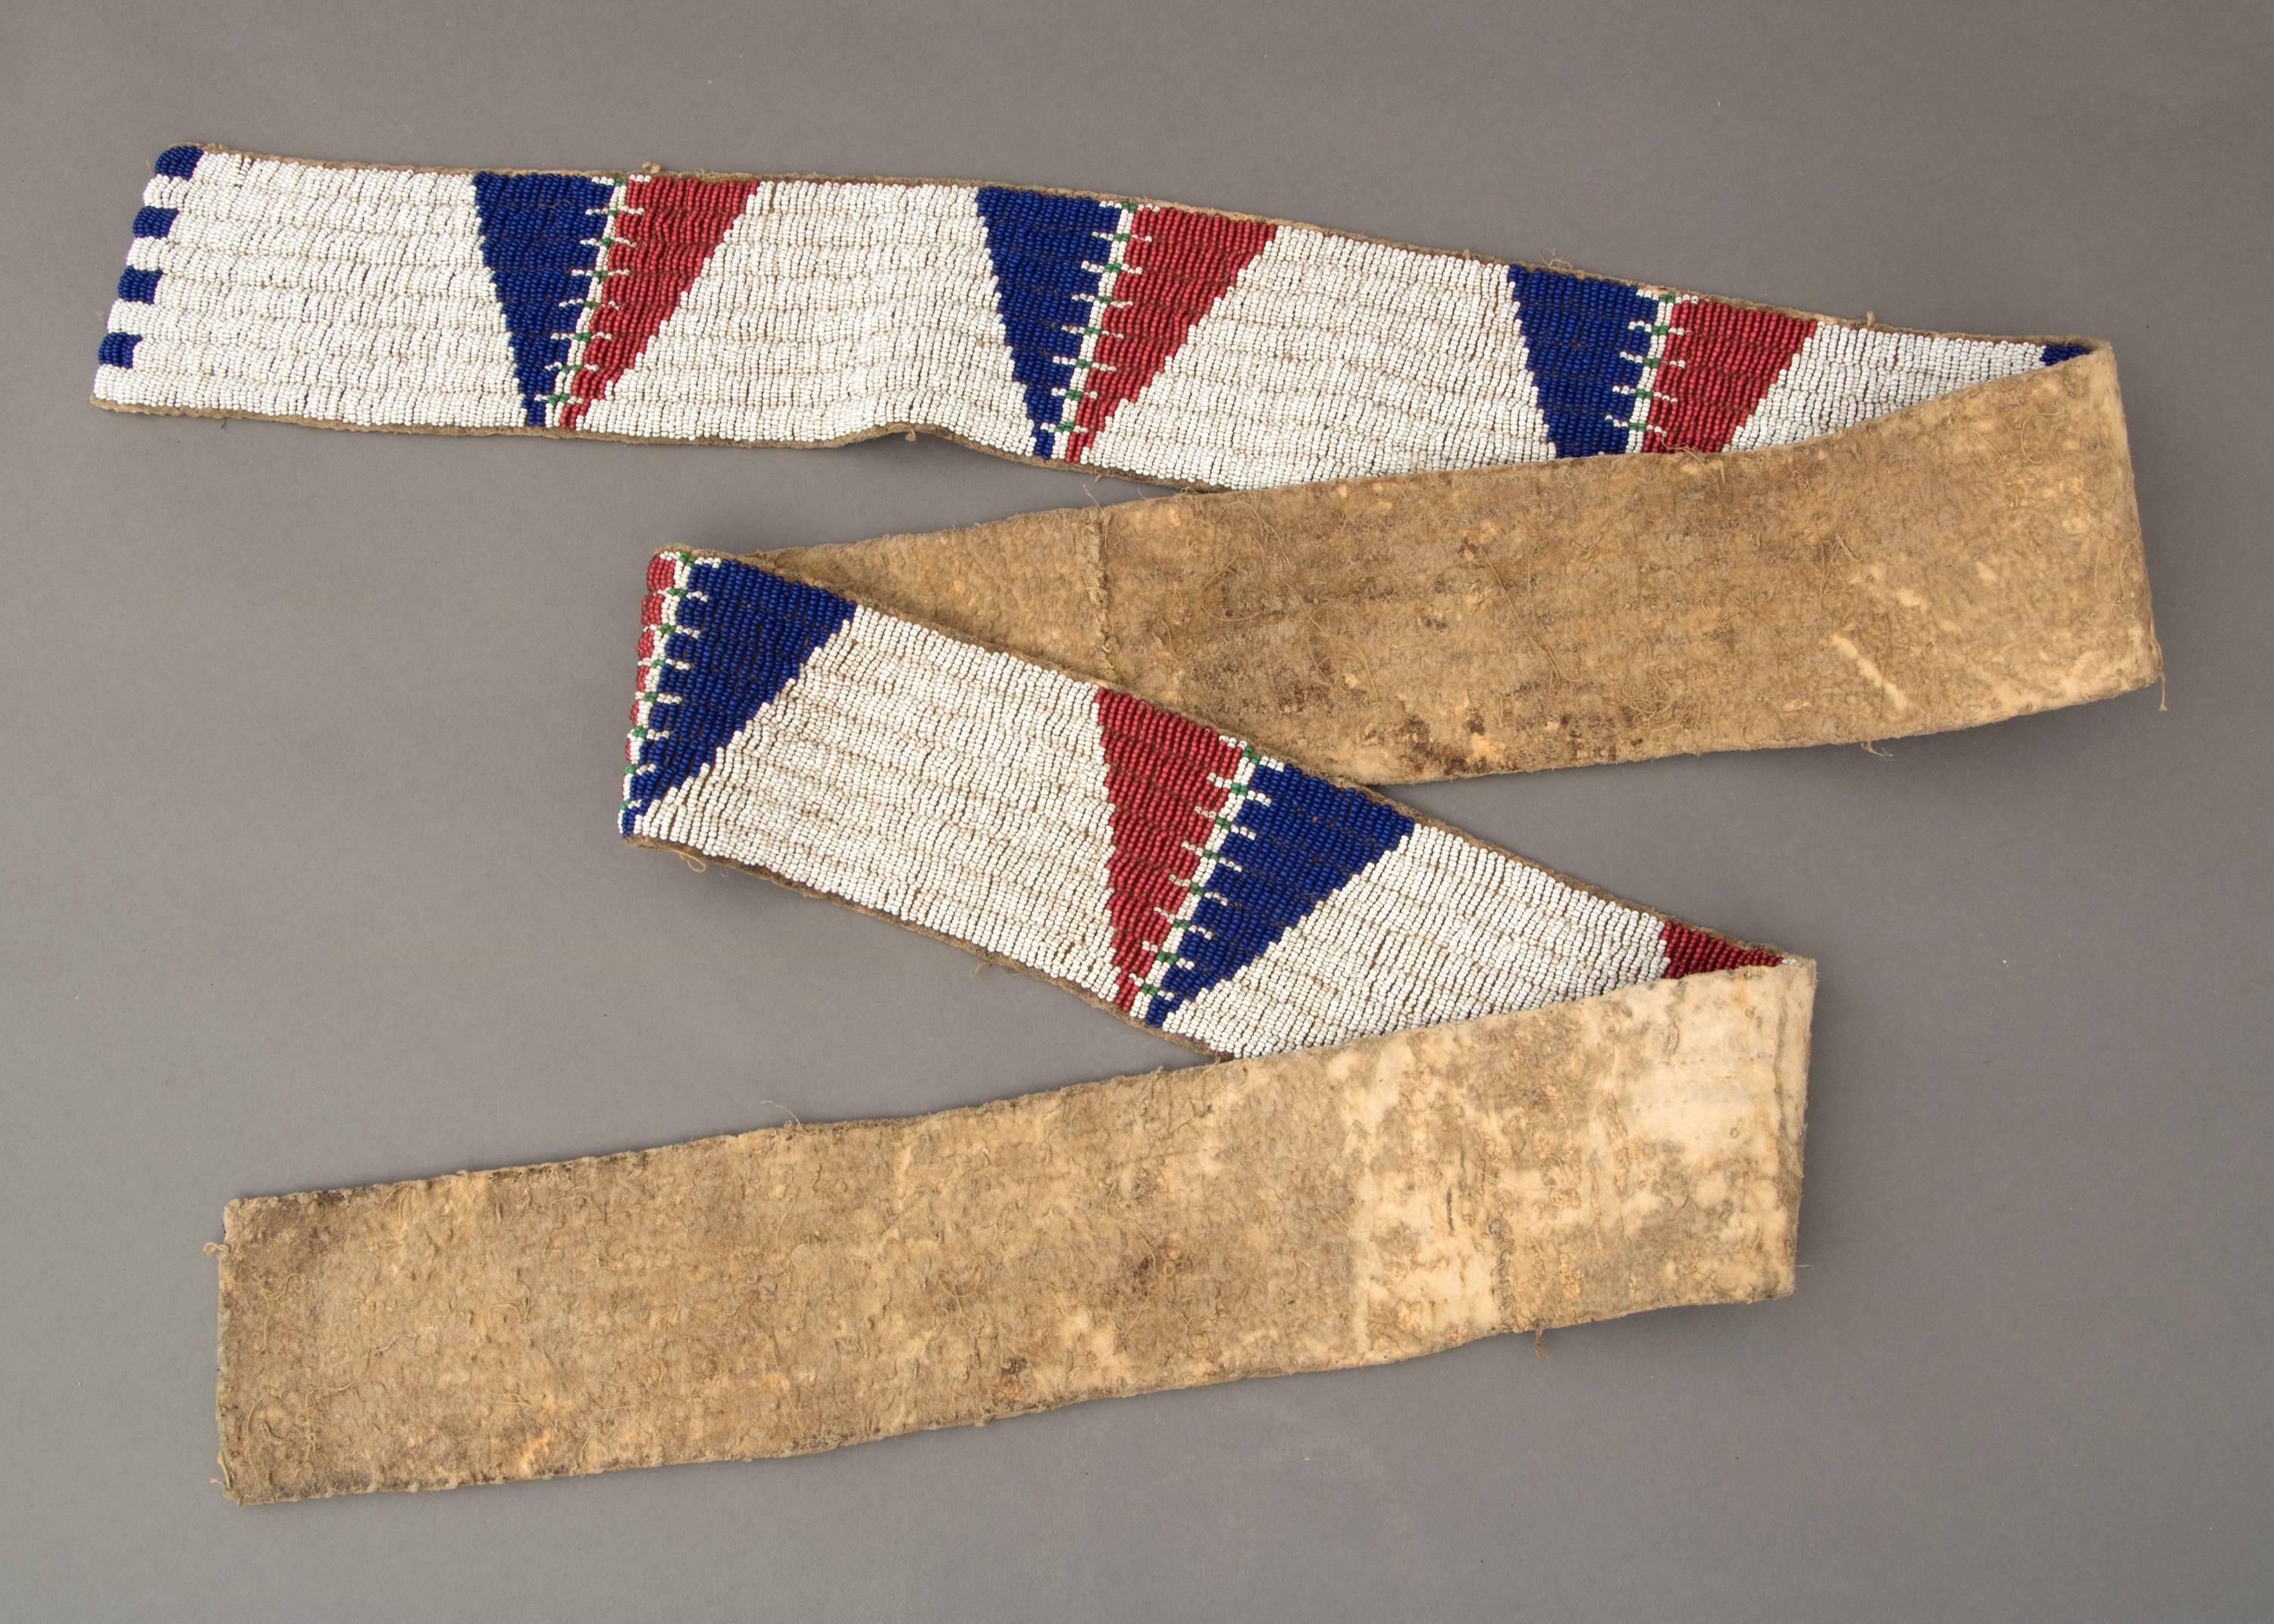 Originally created as two beaded strips which adorned a pair of leggings, these were later joined together, possibly for reuse as a blanket strip. Constructed of native-tanned hide and beaded with stylized tepee (tipi) motifs in red and blue against